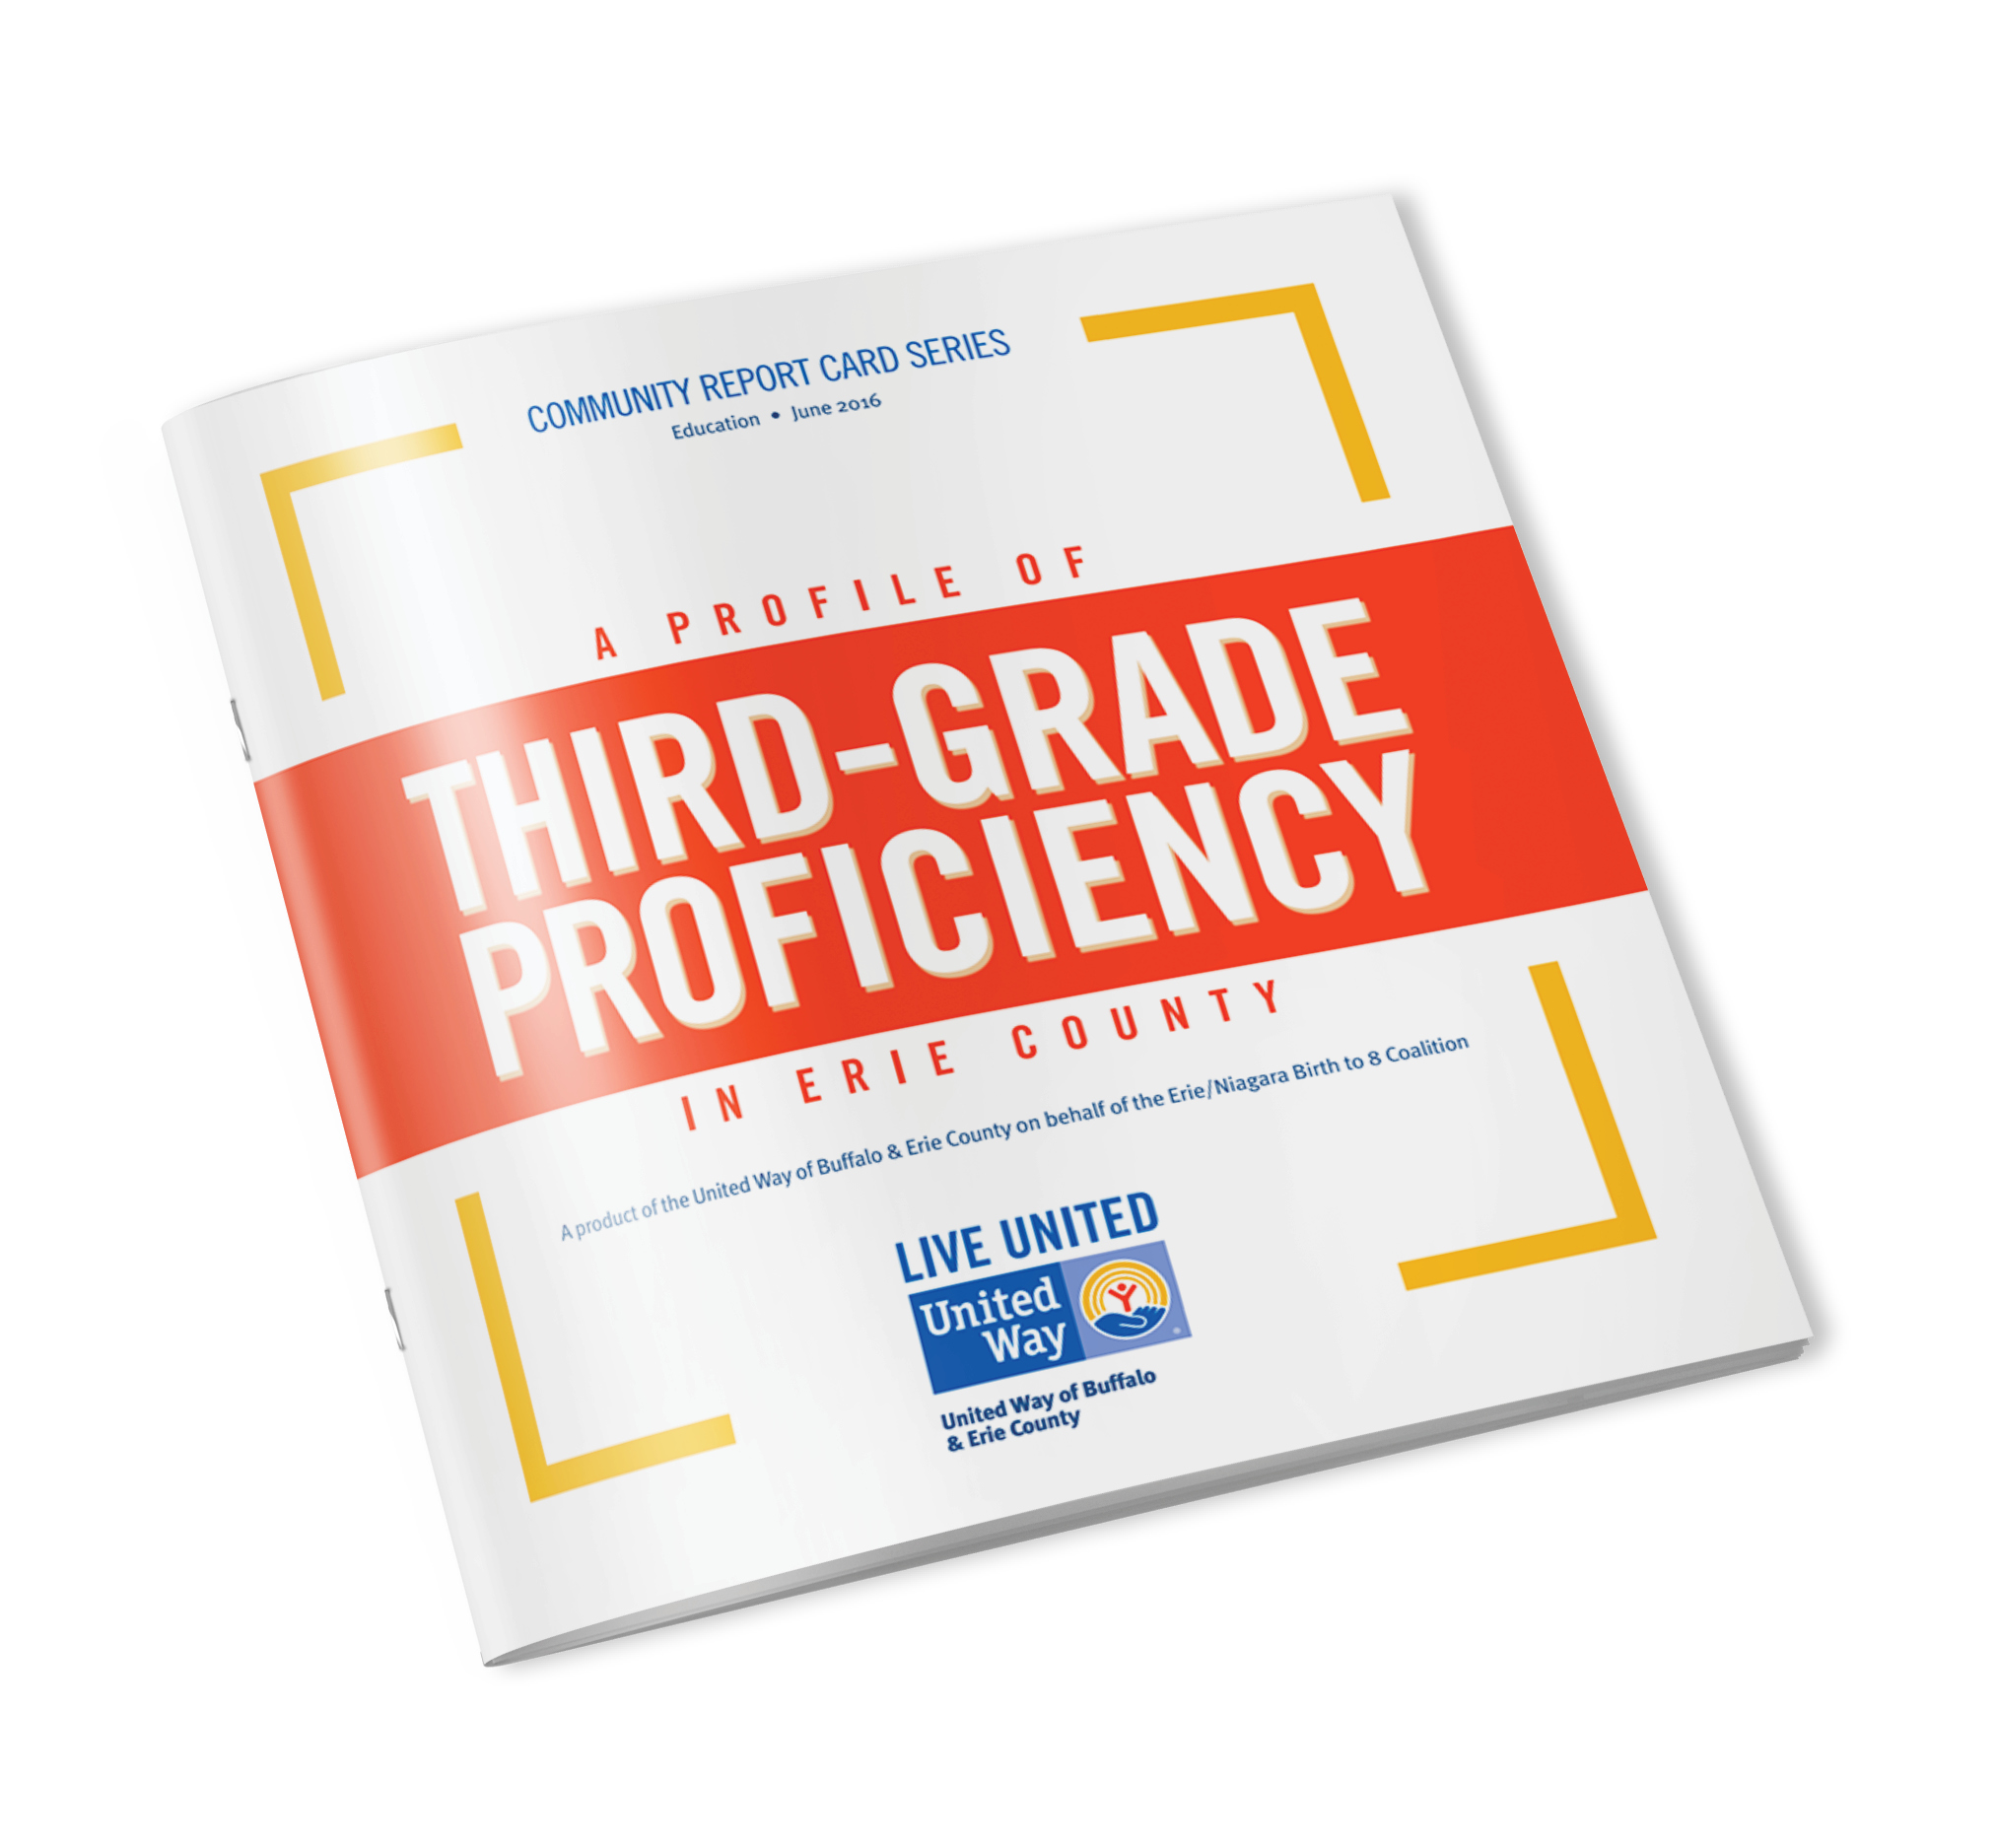 A Profile of Third-Grade Proficiency in Erie County